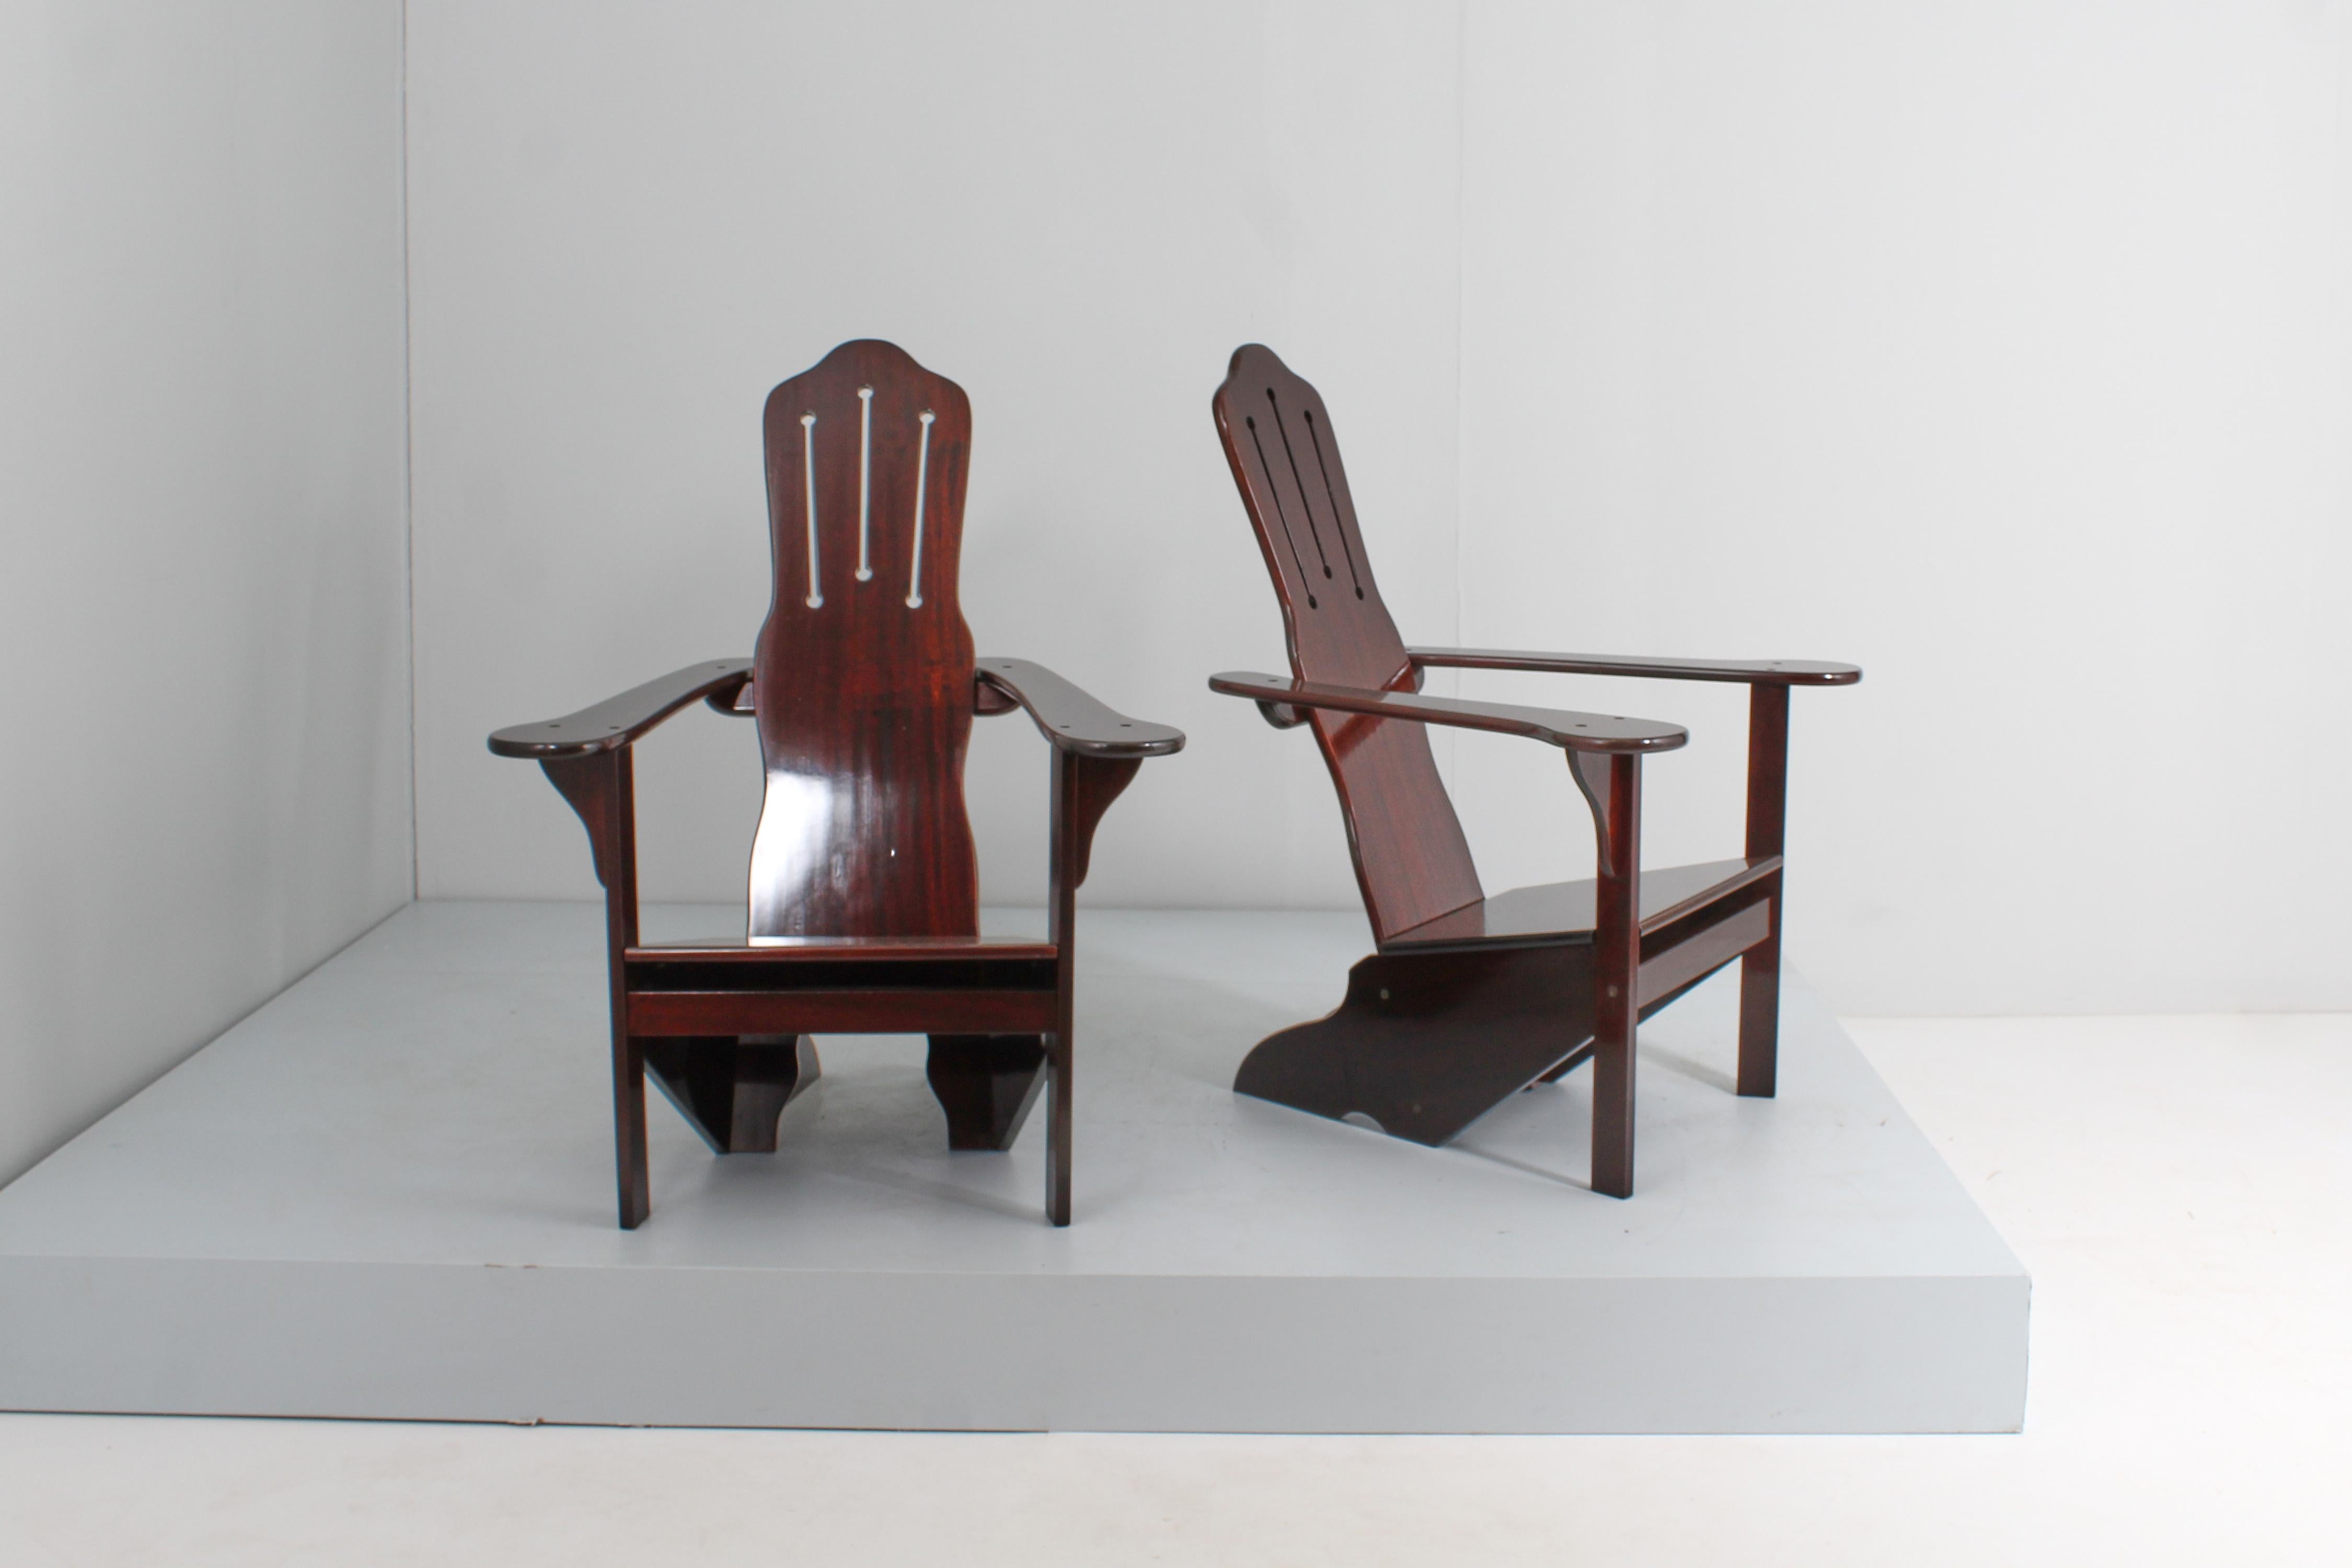 Imposing and rare set of 2 rationalist chairs with curved and straight lines, clean and incisive, entirely in wood, restored. Attributable Gino Levi Montalcini, Italy 1970s.